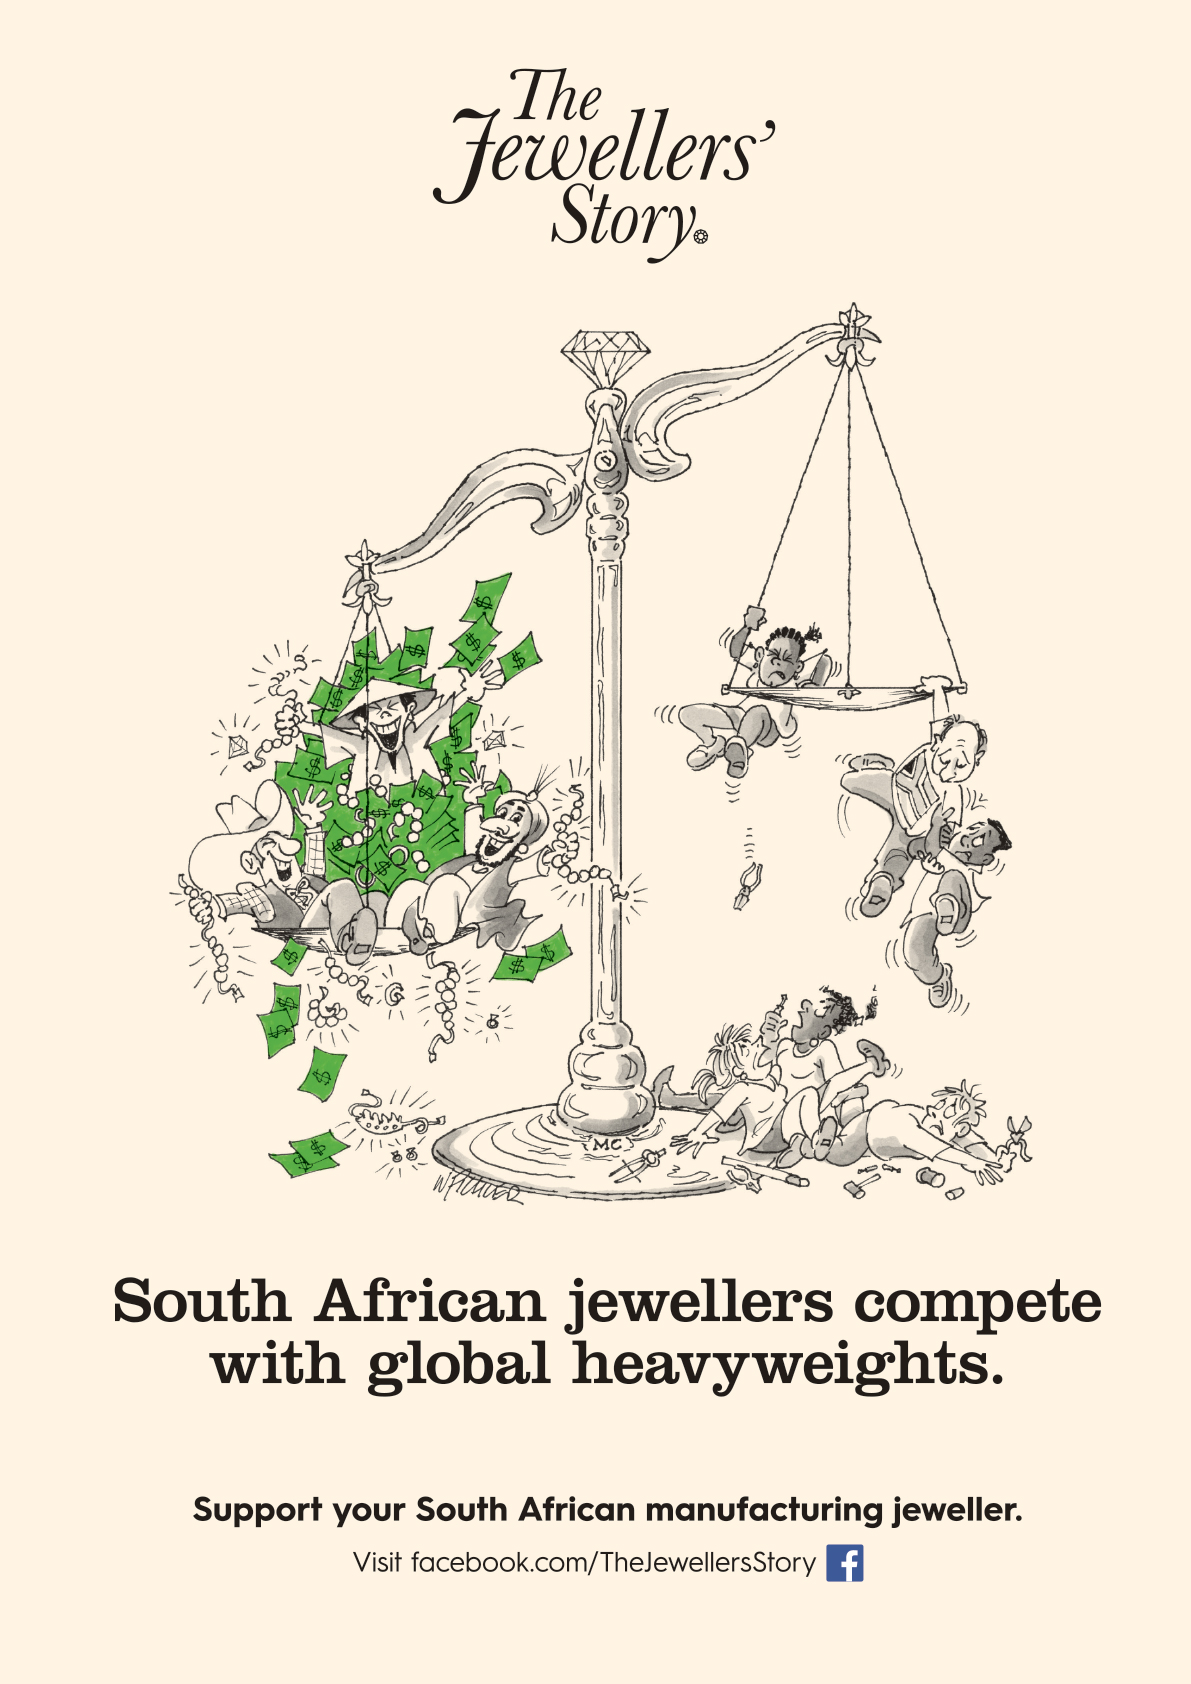 South African jewellers compete with global heavyweights